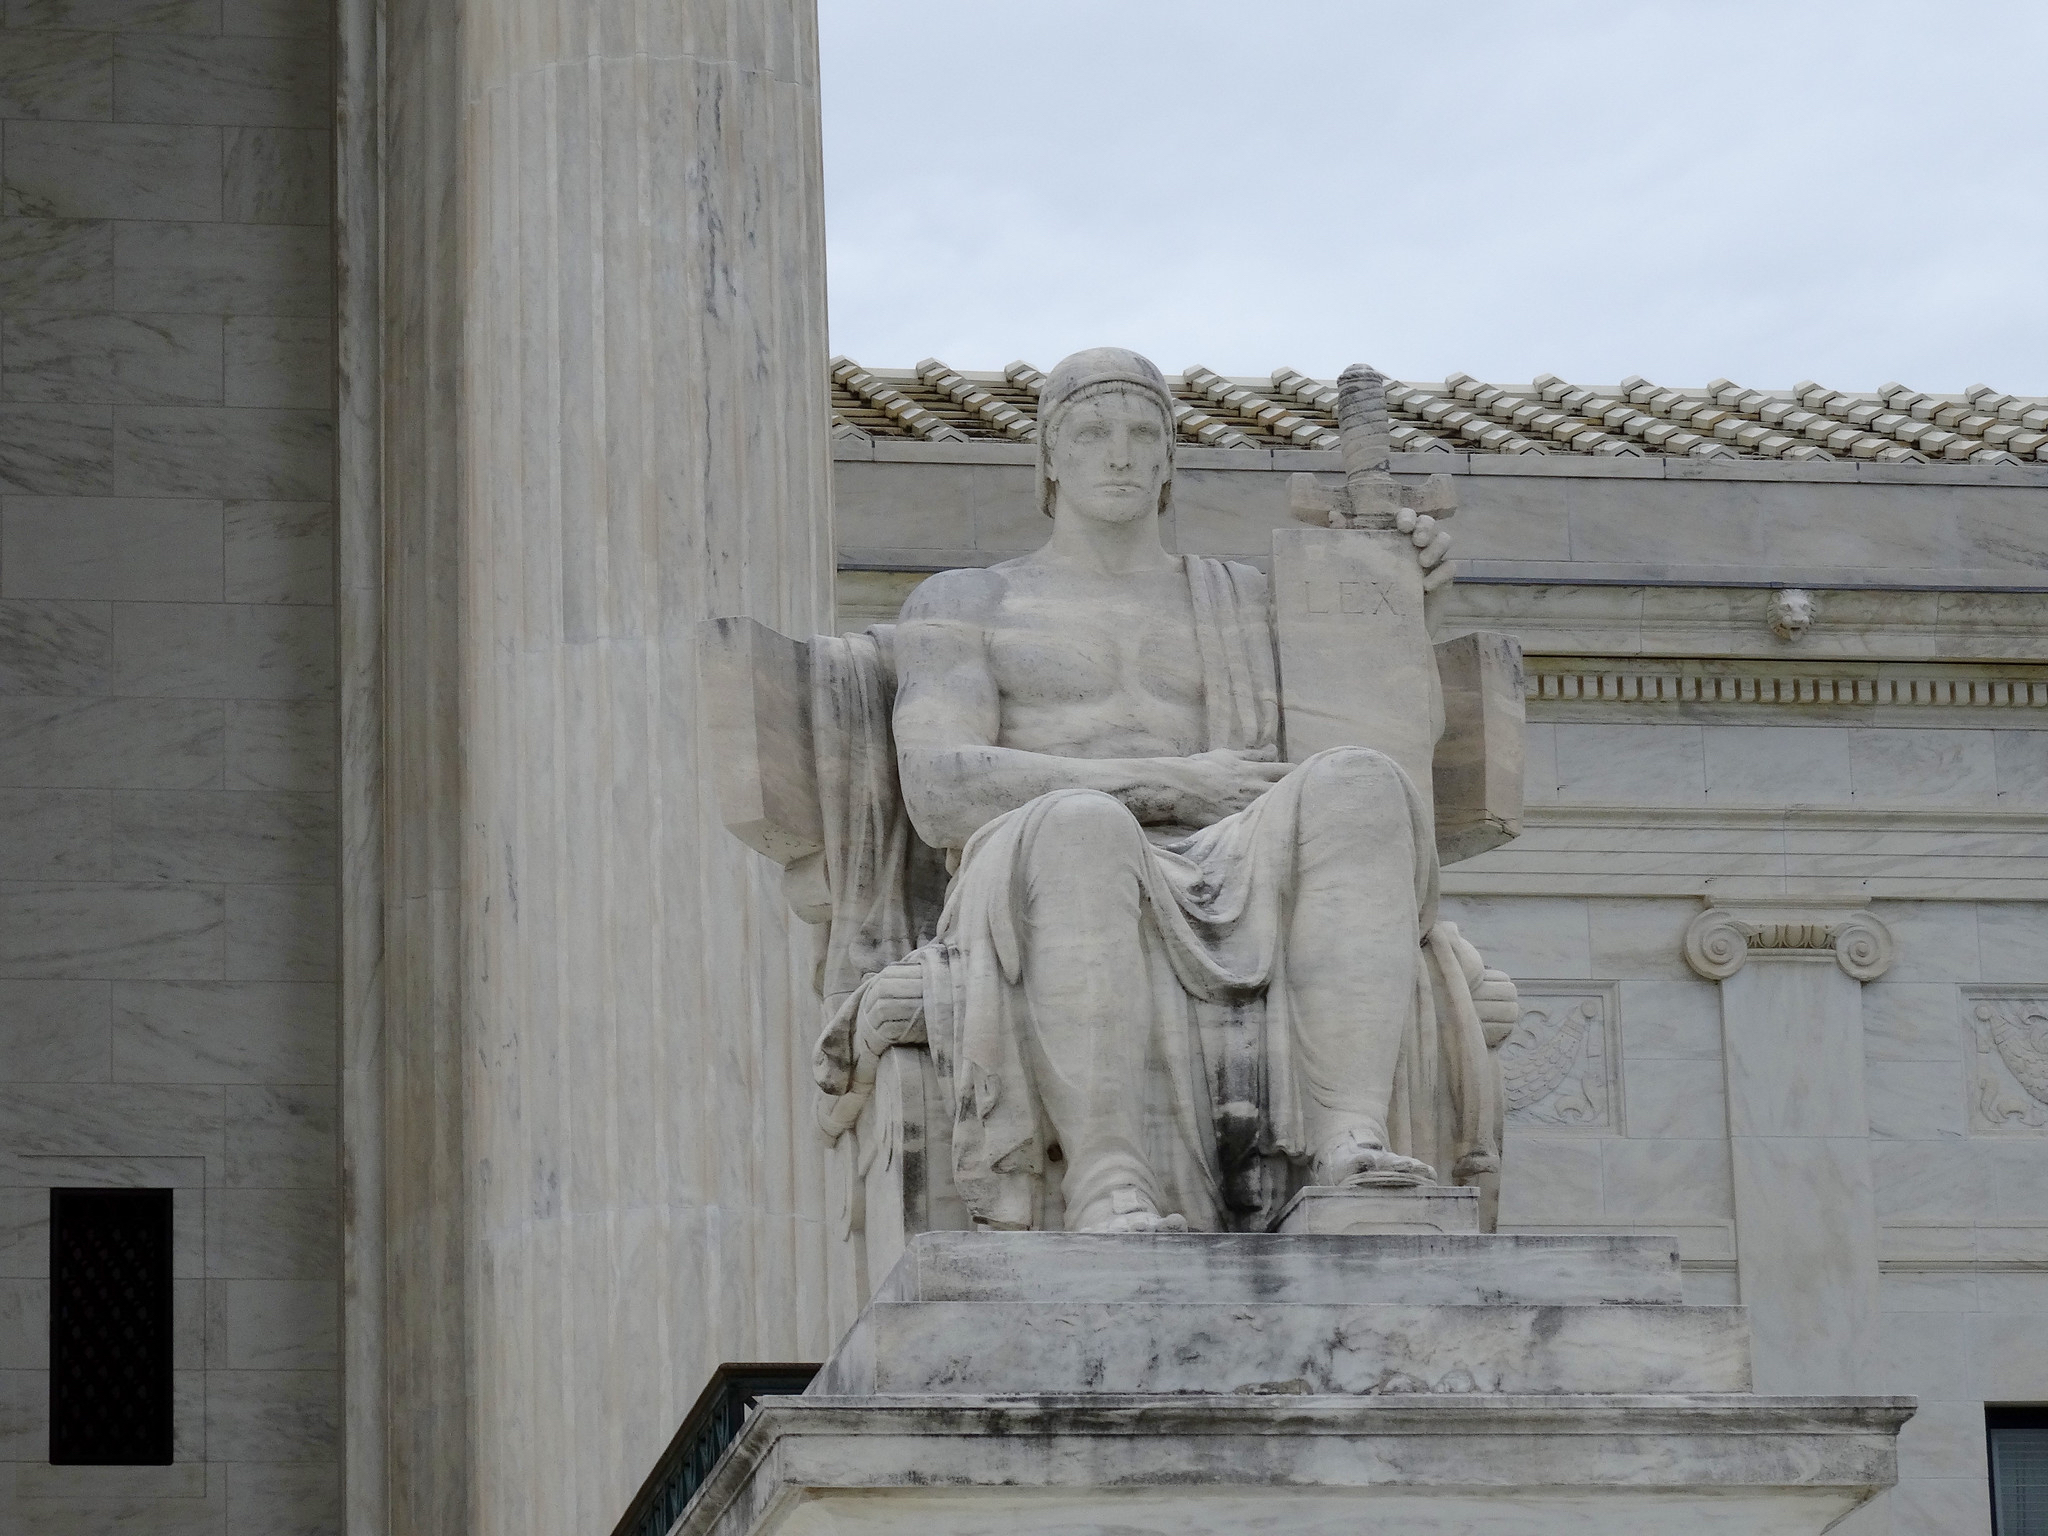 The statute of a seated man outside the Supreme Court